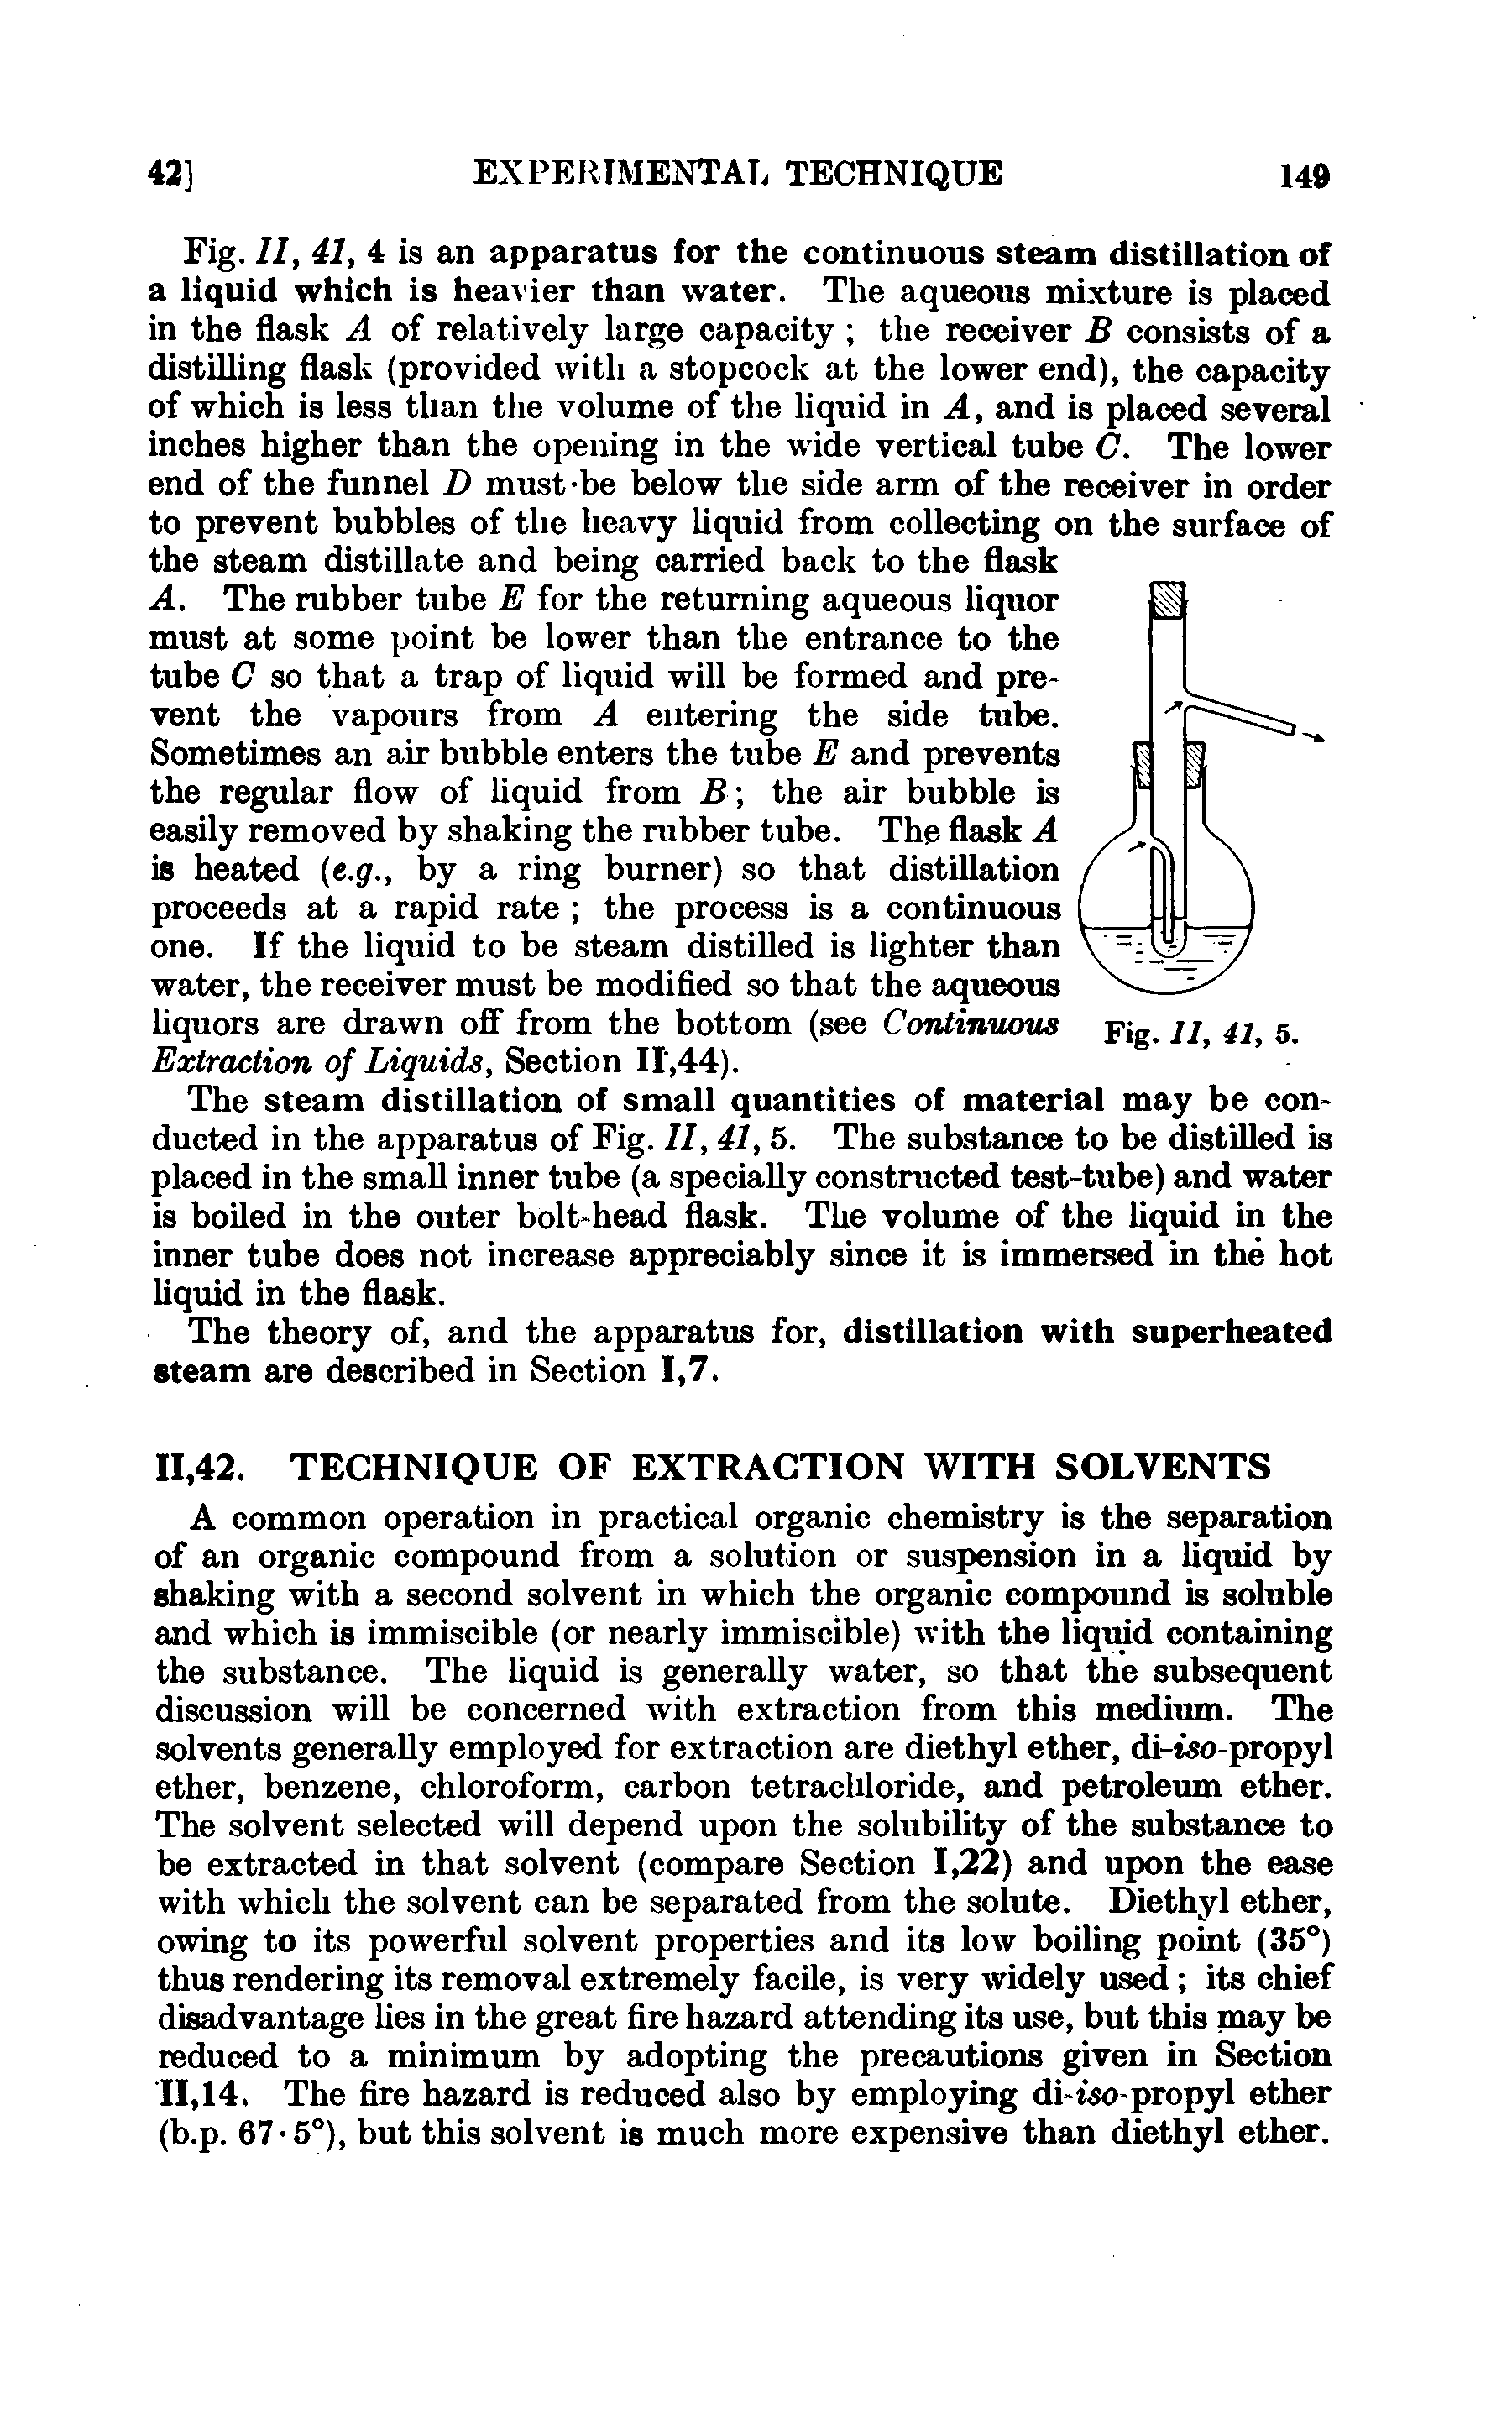 Fig. II, 41, 4 is an apparatus for the continuous steam distillation of a liquid which is heavier than water. The aqueous mixture is placed in the flask A of relatively large capacity the receiver B consists of a distilling flask (provided with a stopcock at the lower end), the capacity of which is less than the volume of the liquid in A, and is placed several inches higher than the opening in the wide vertical tube C. The lower end of the funnel D must-be below the side arm of the receiver in order to prevent bubbles of the heavy liquid from collecting on the surface of the steam distillate and being carried back to the flask A. The rubber tube E for the returning aqueous liquor must at some point be lower than the entrance to the tube C so that a trap of liquid will be formed and prevent the vapours from A entering the side tube.